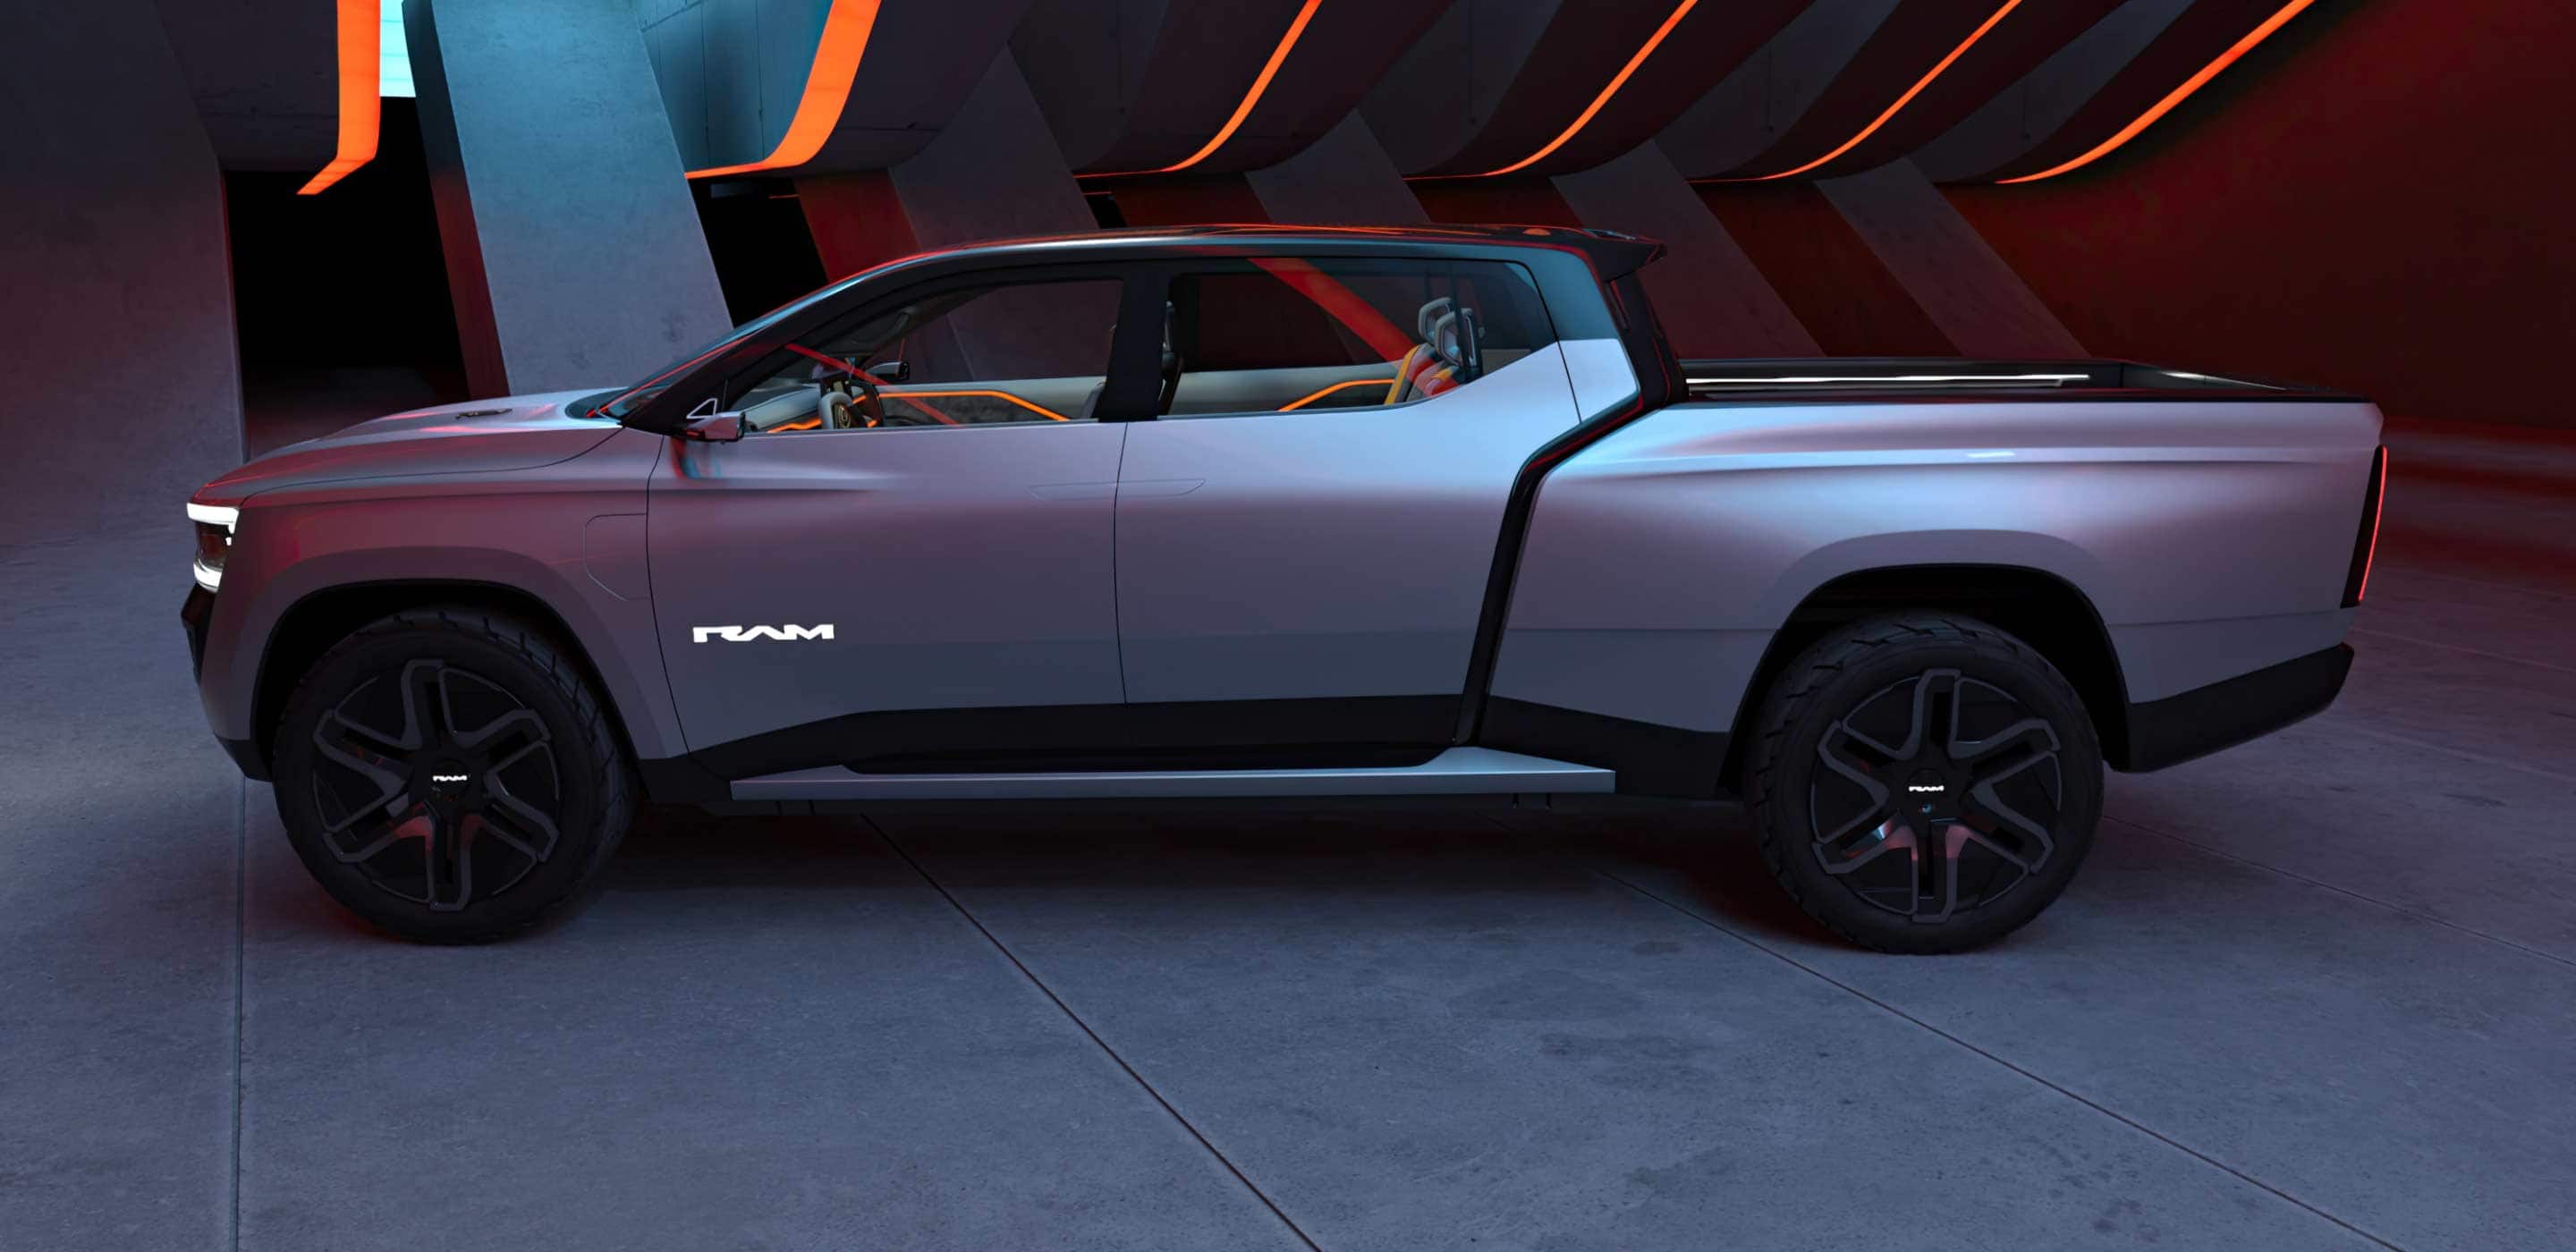 Display A driver-side profile of the Ram Revolution Concept in a studio with a dramatic set design and lighting.